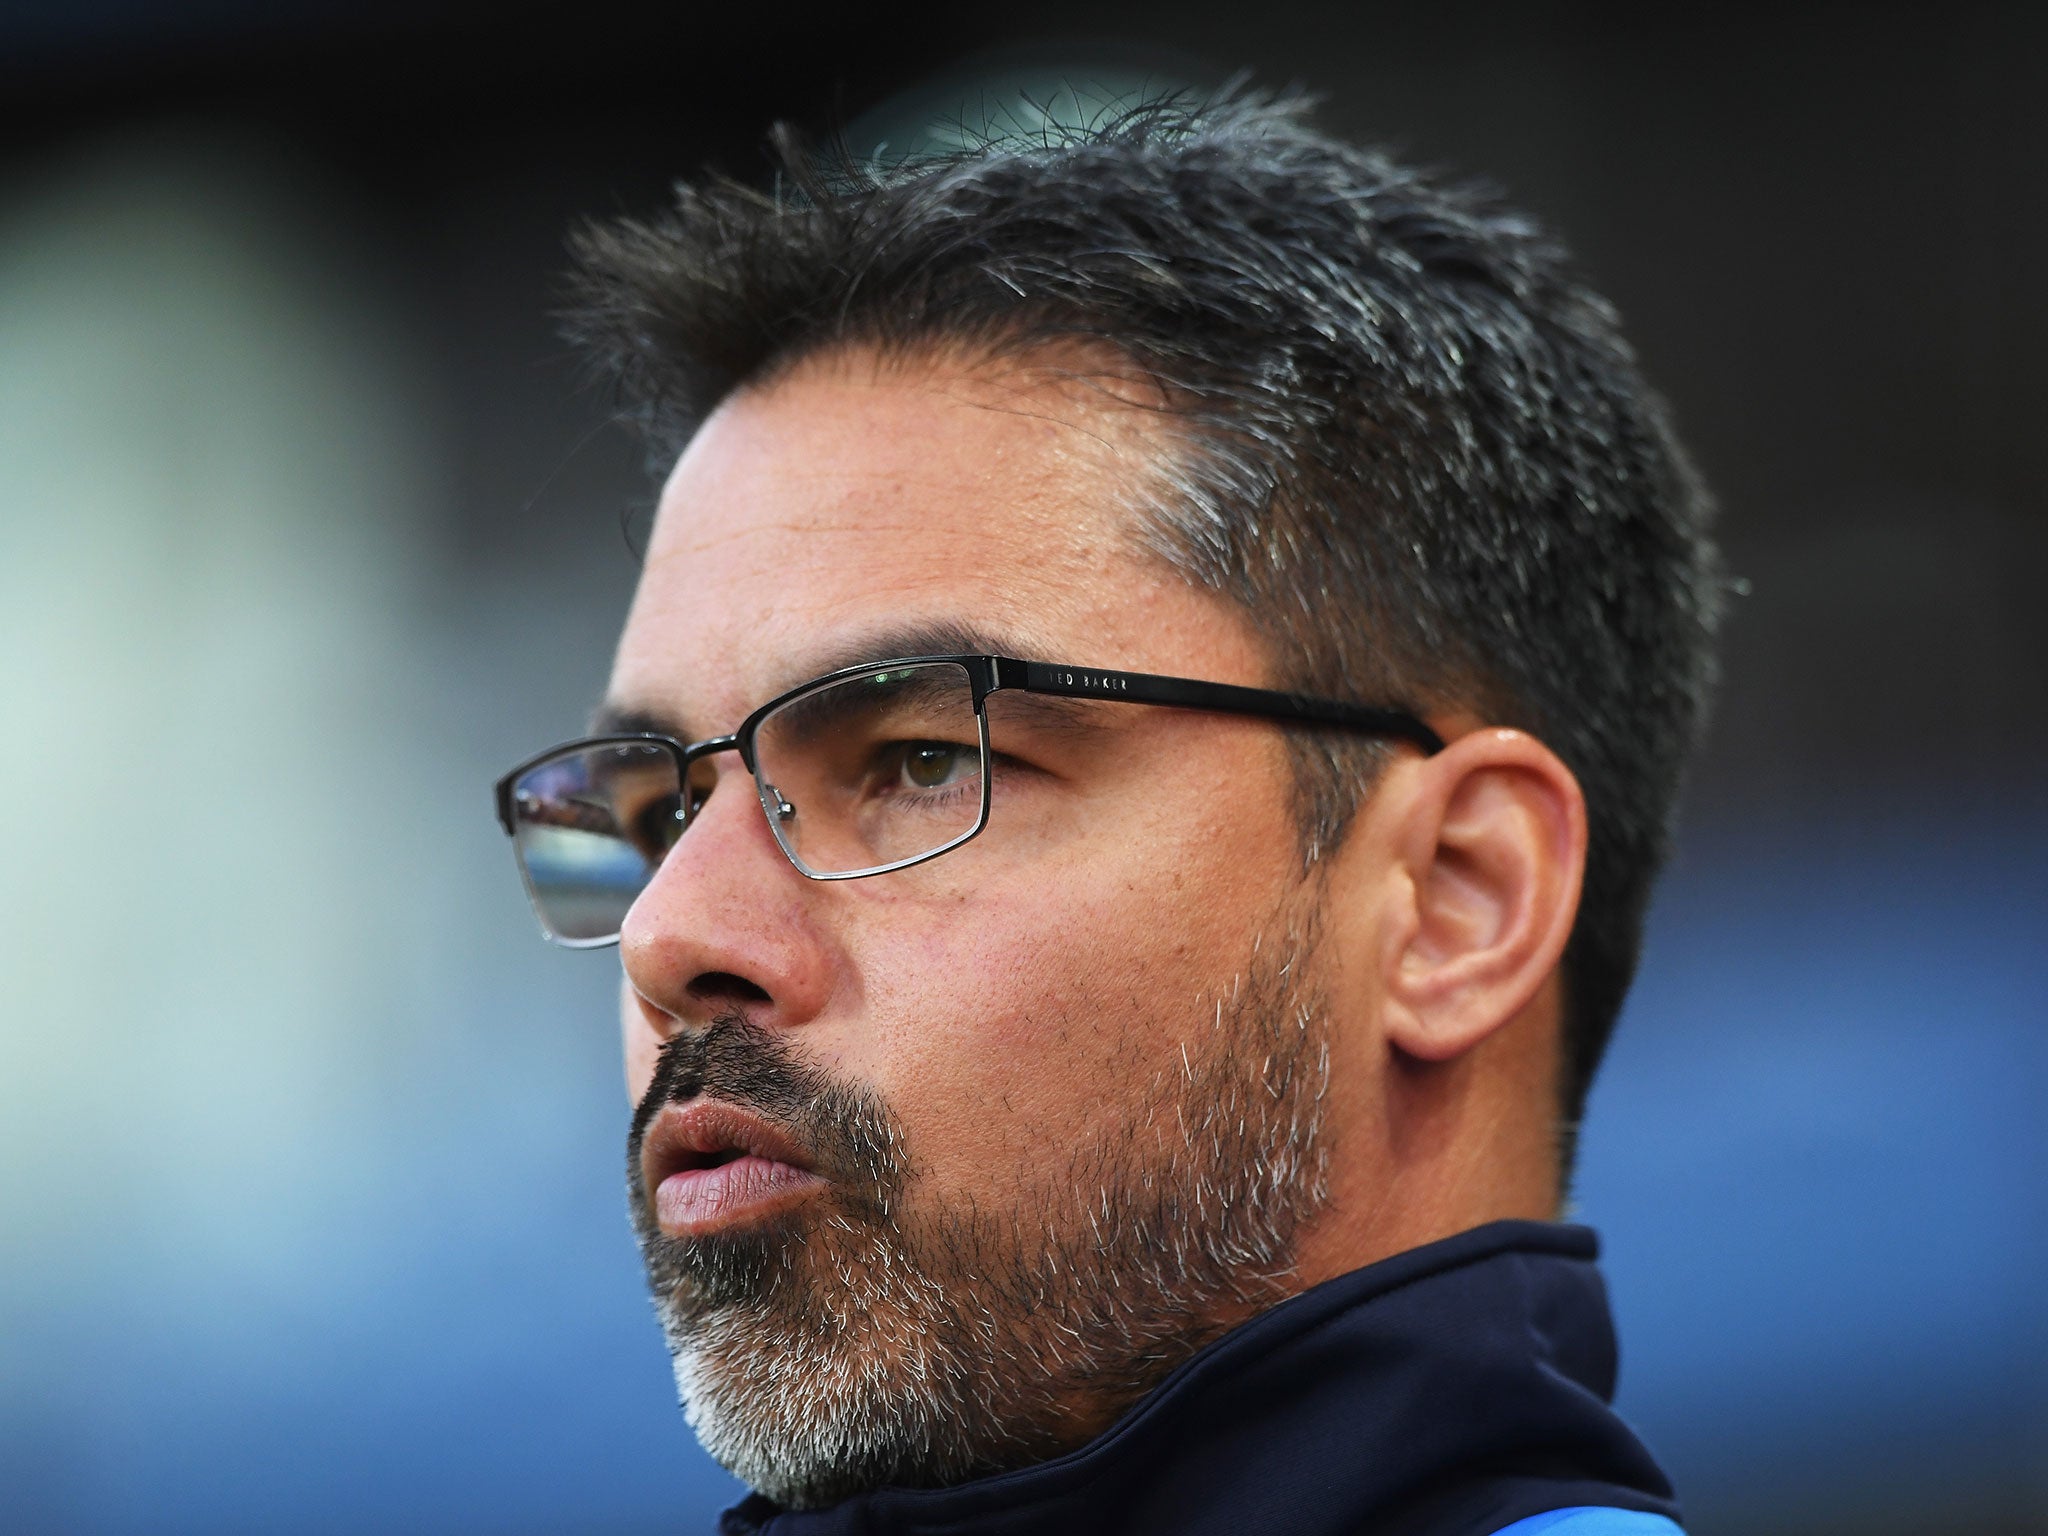 David Wagner, the current Huddersfield Town manager, is reportedly being lined up as a replacement to Di Matteo